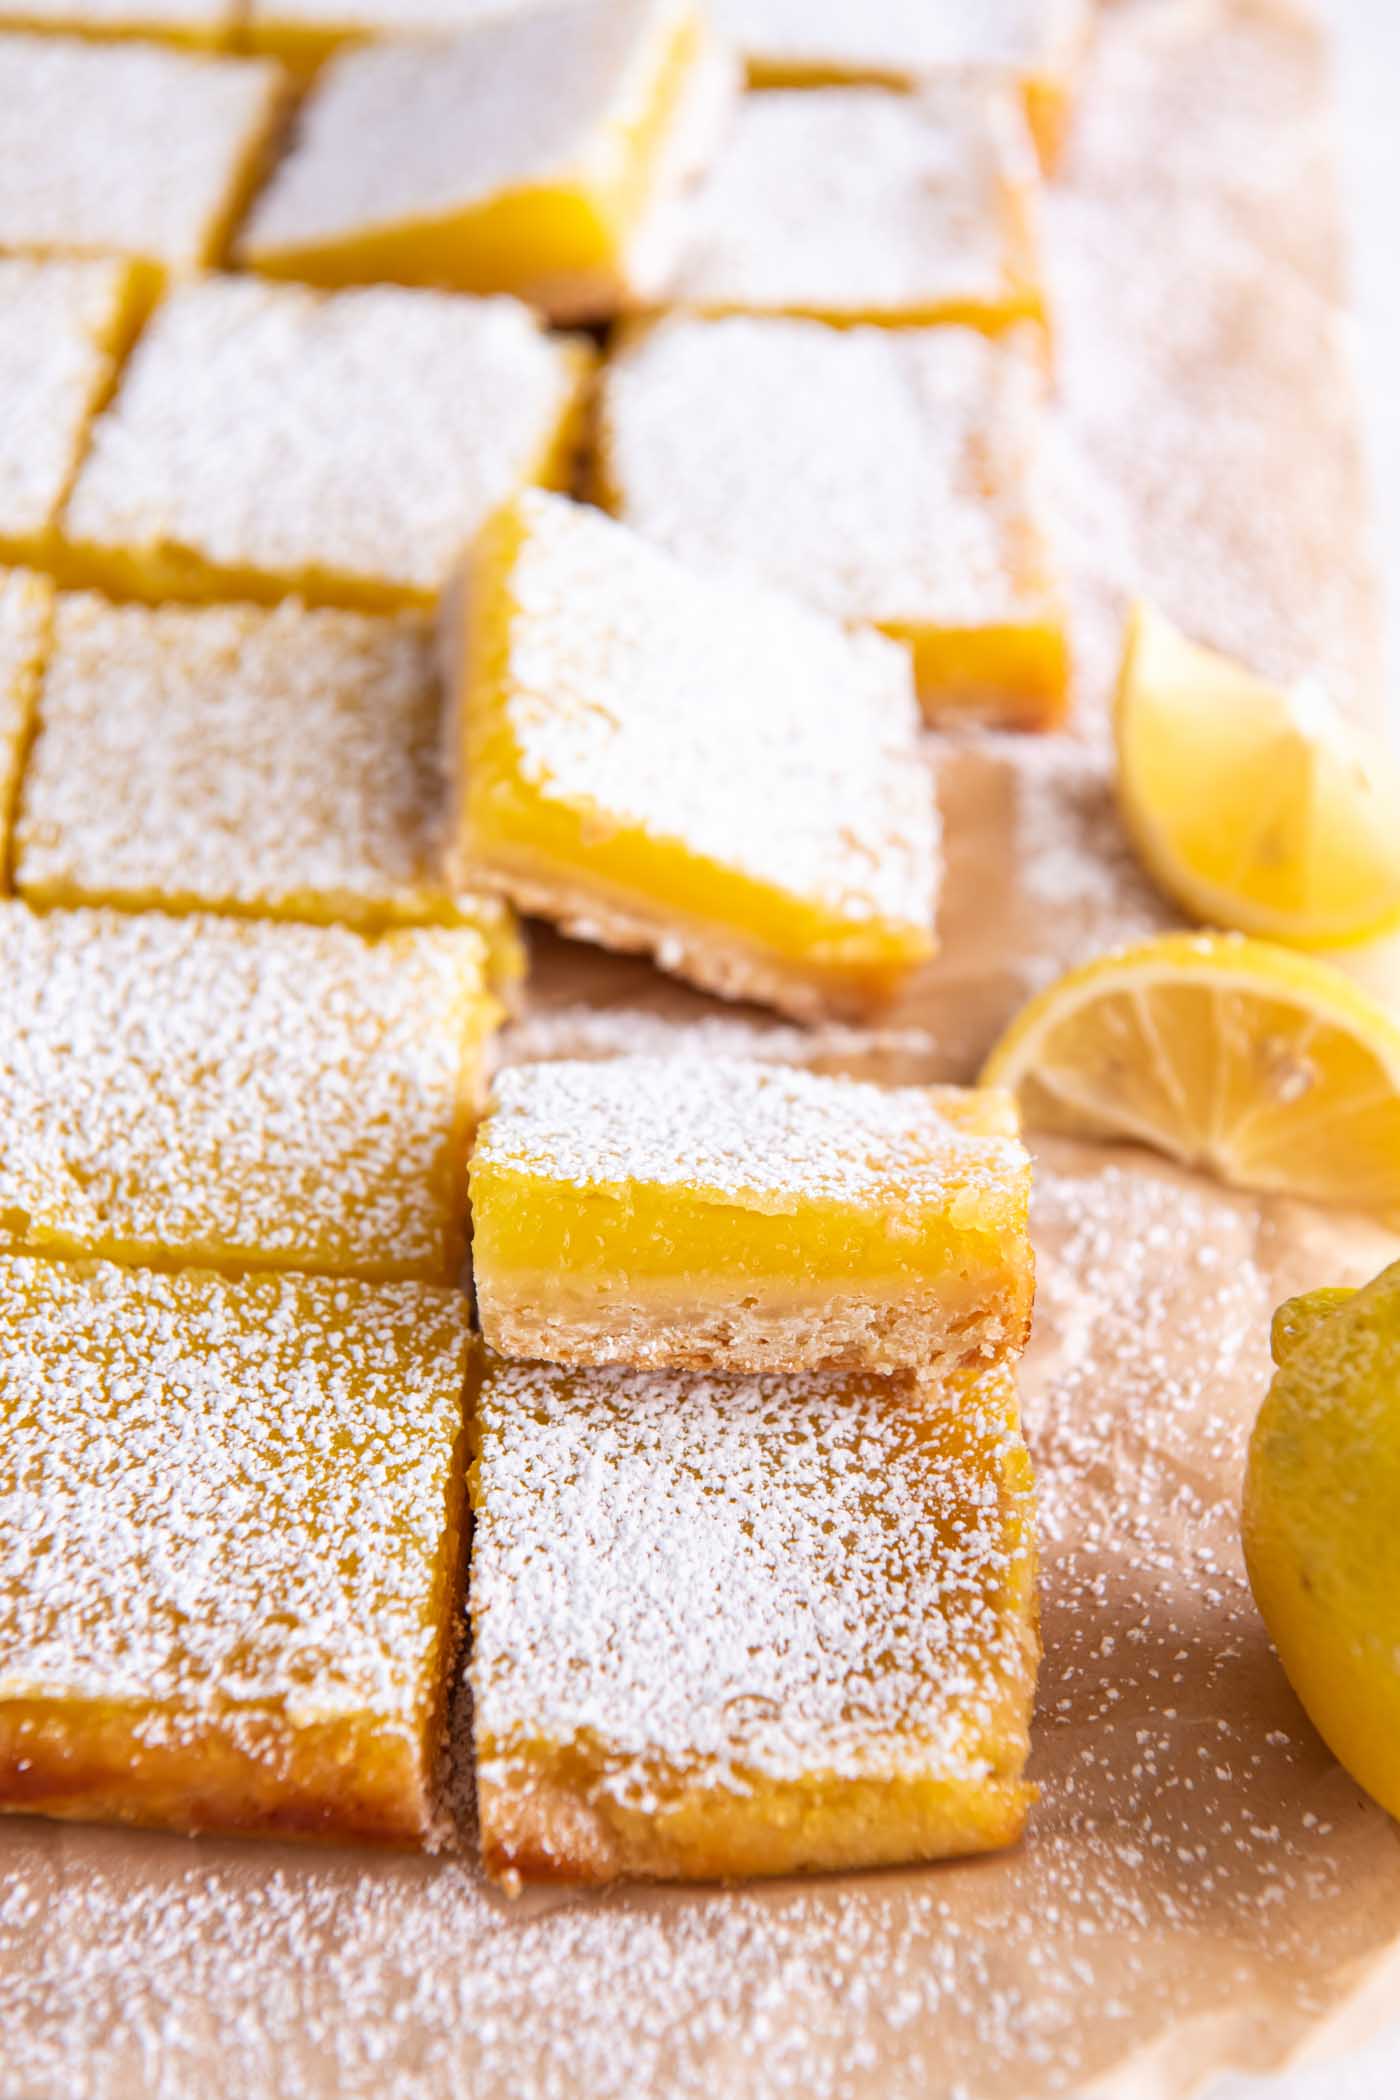 Lemon bars cut into squares and dusted with powdered sugar.